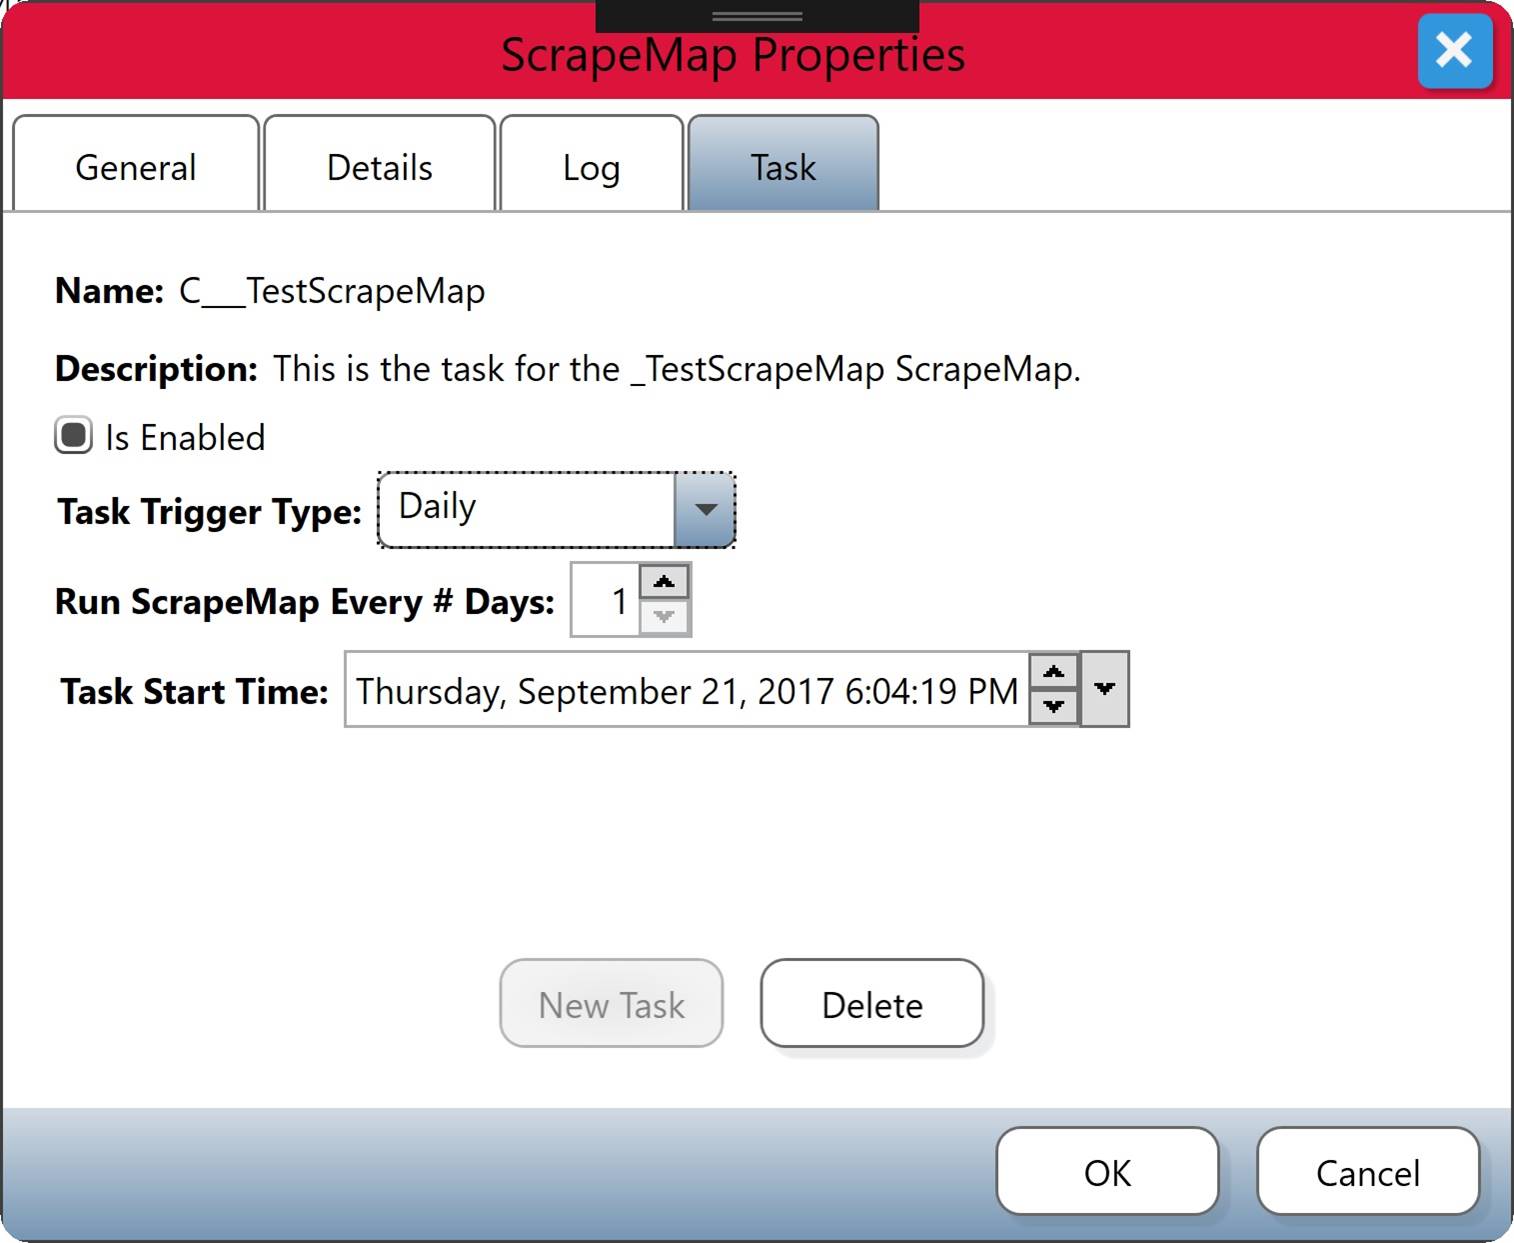 Task Tab of the ScrapeMap Properties Dialog with a Daily Task